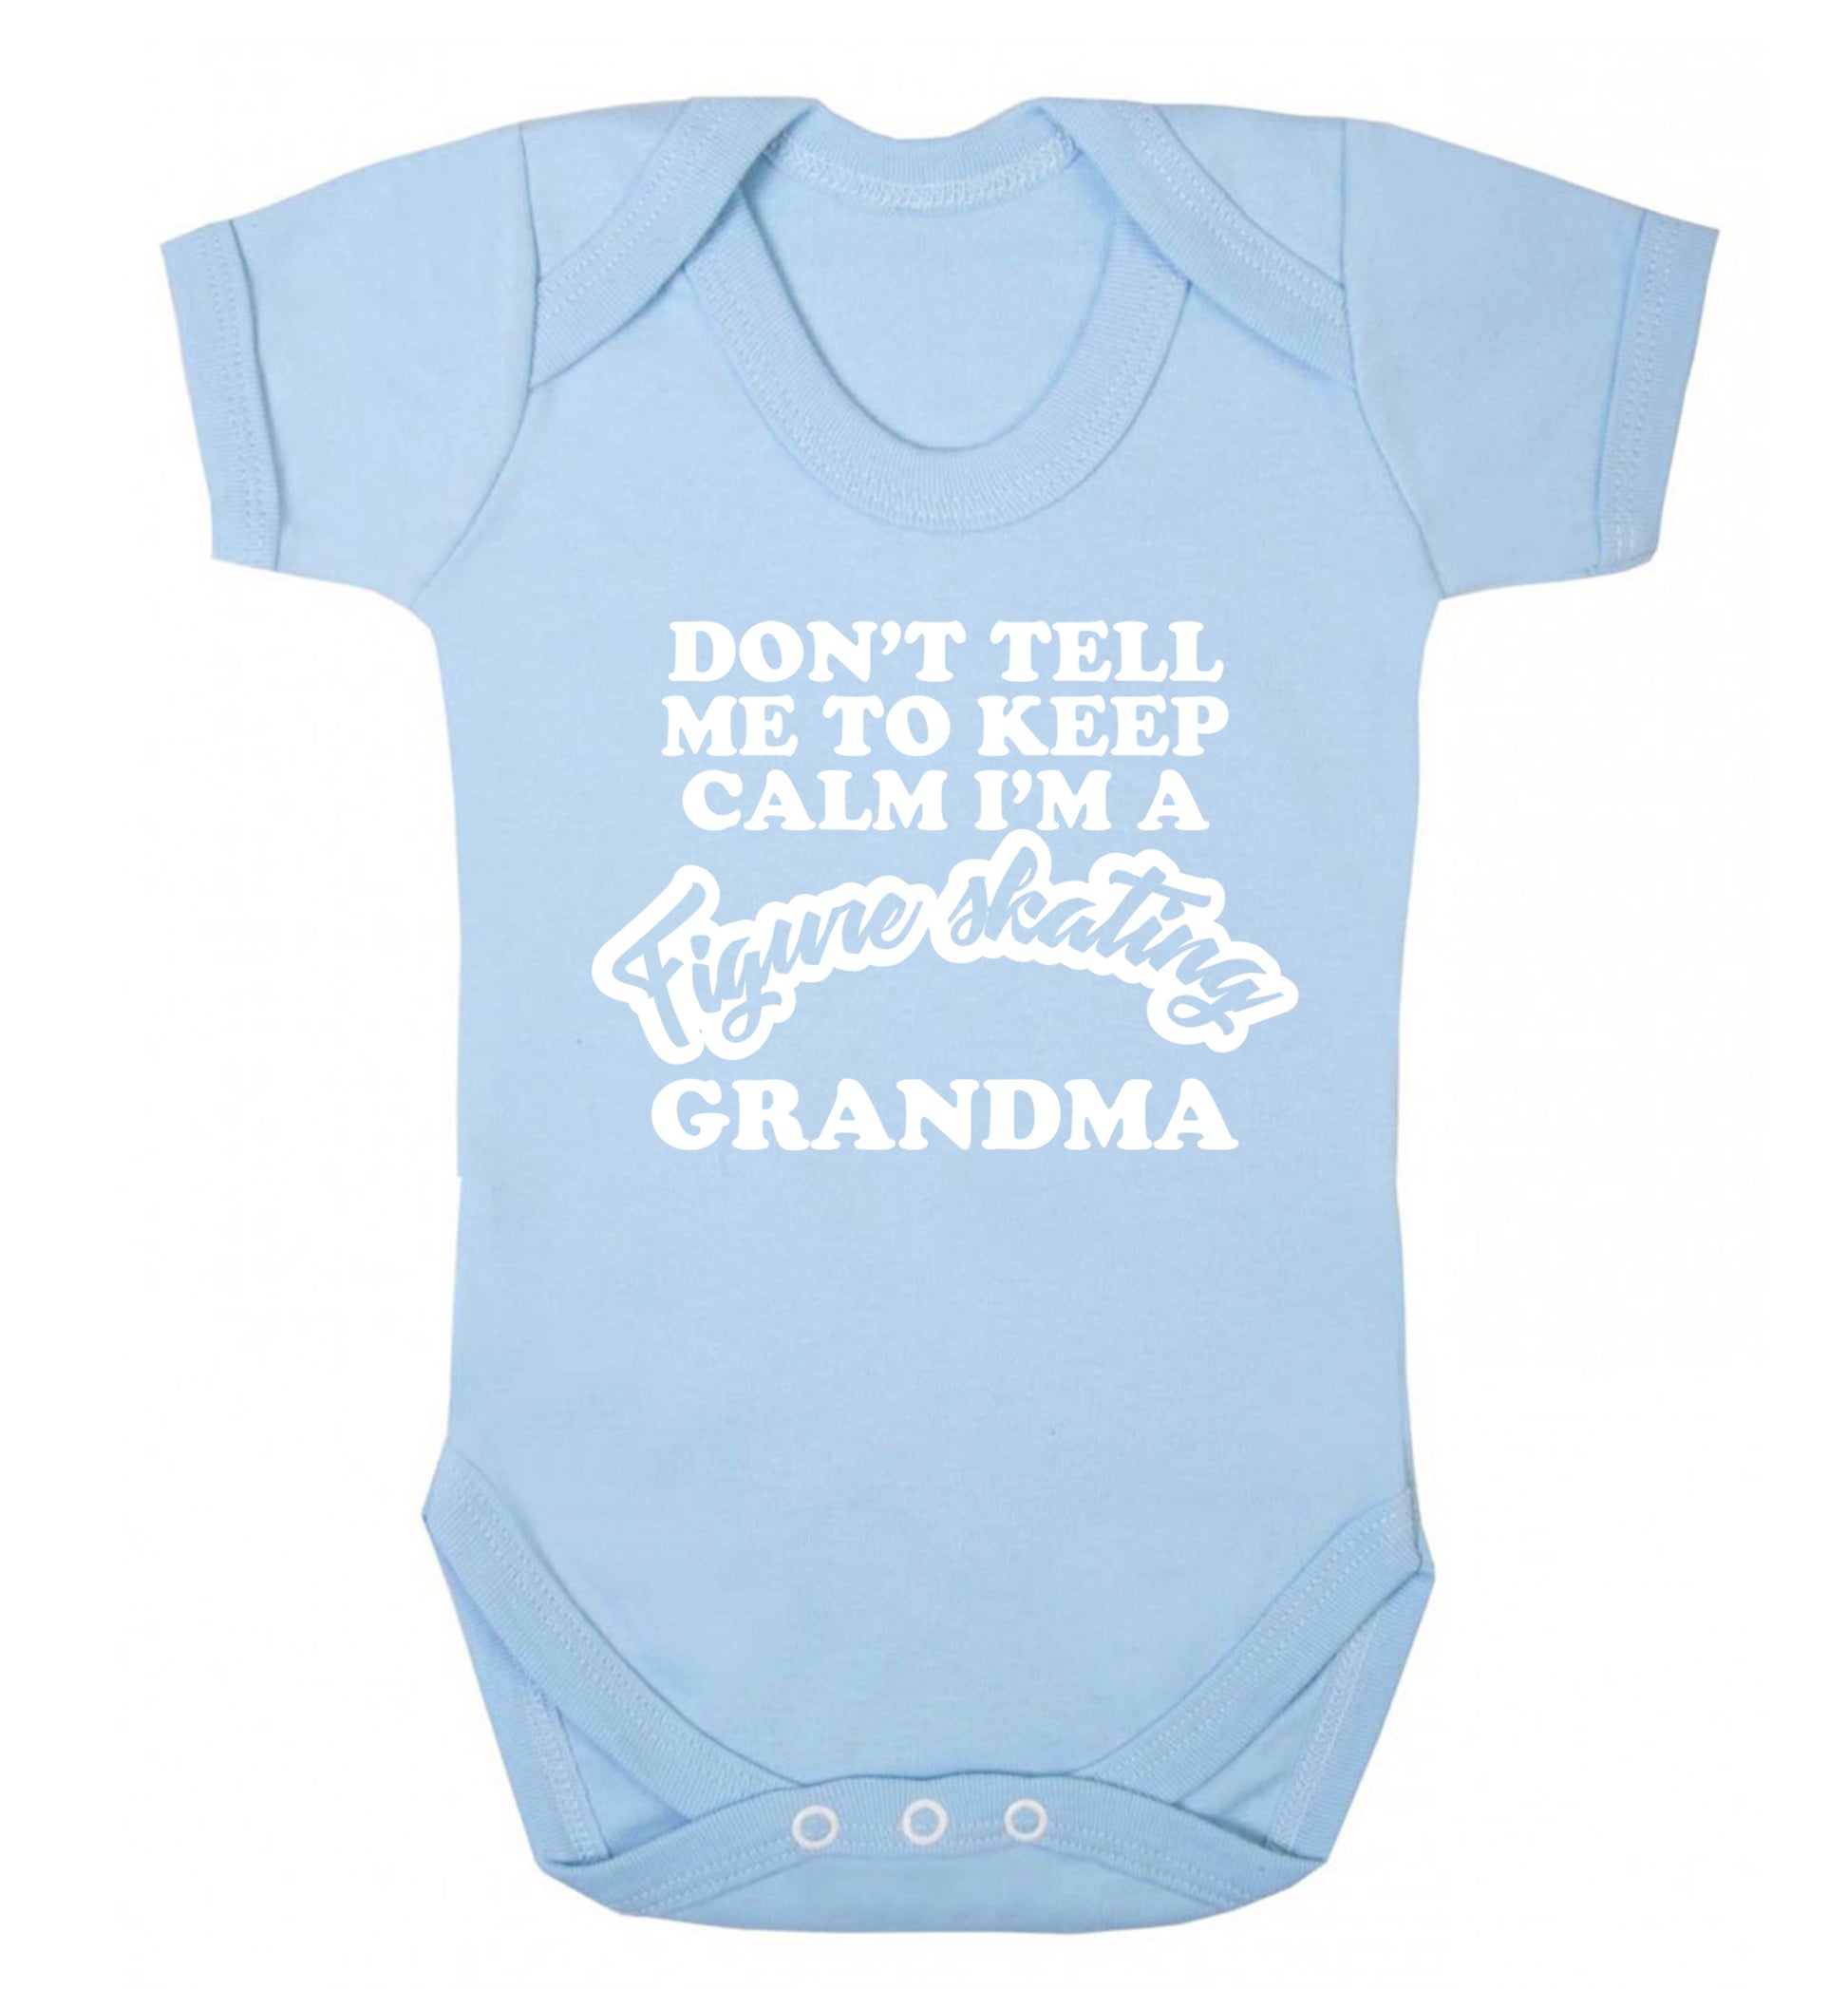 Don't tell me to keep calm I'm a figure skating grandma Baby Vest pale blue 18-24 months